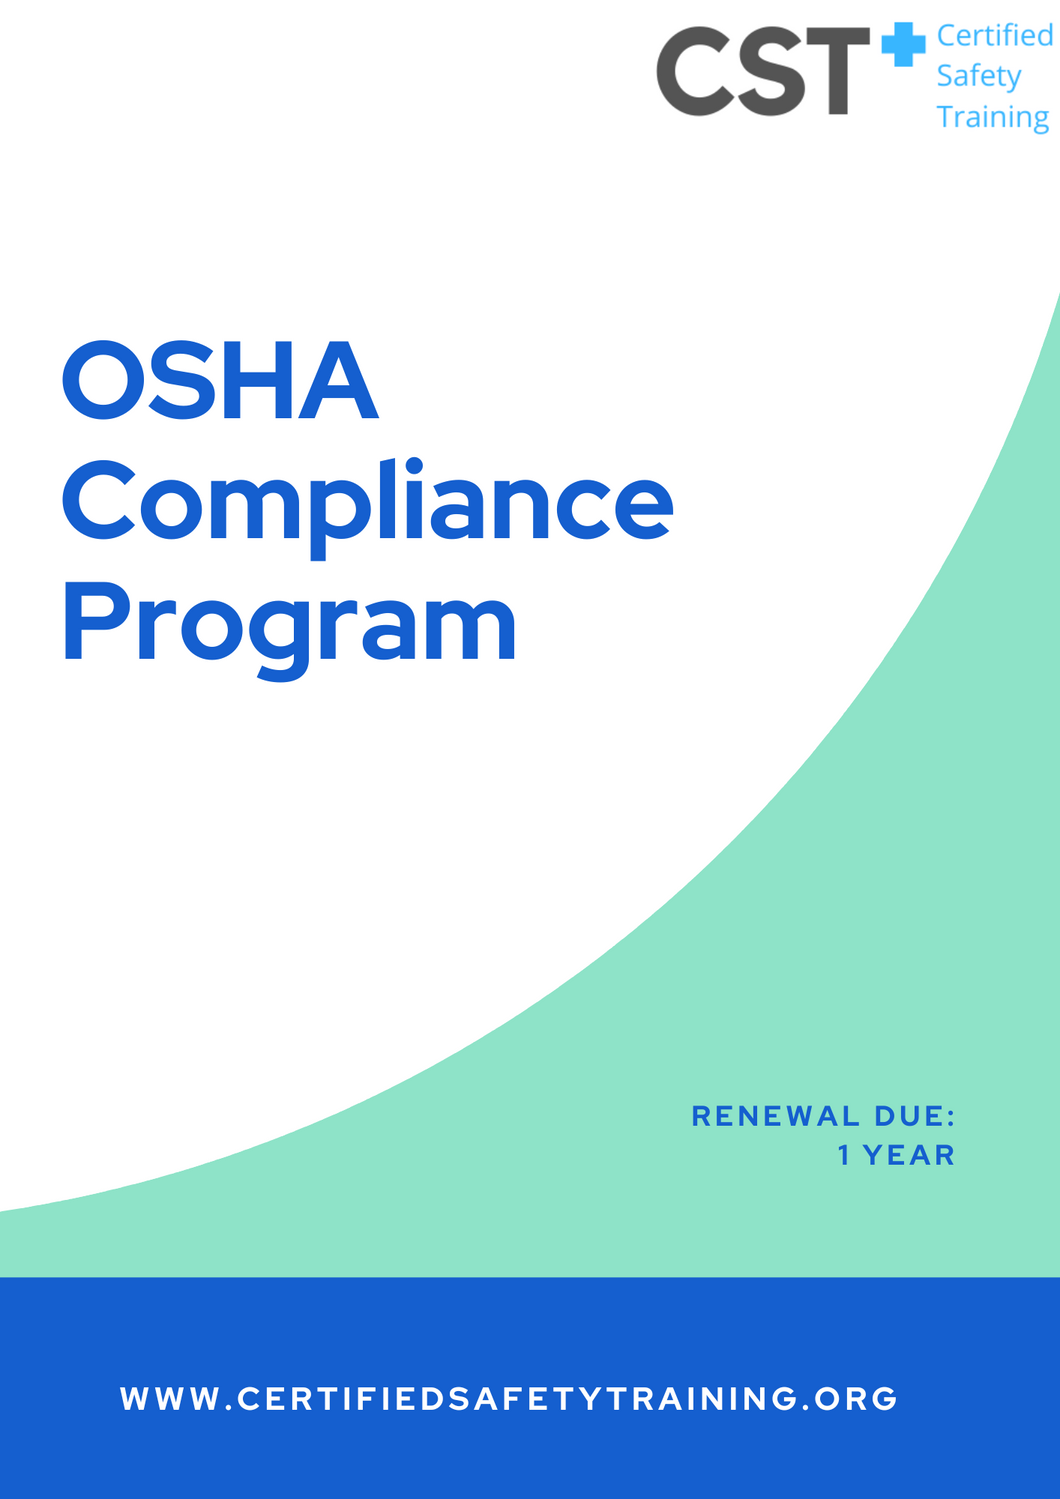 Annual Complete OSHA Compliance for Funeral Service Education